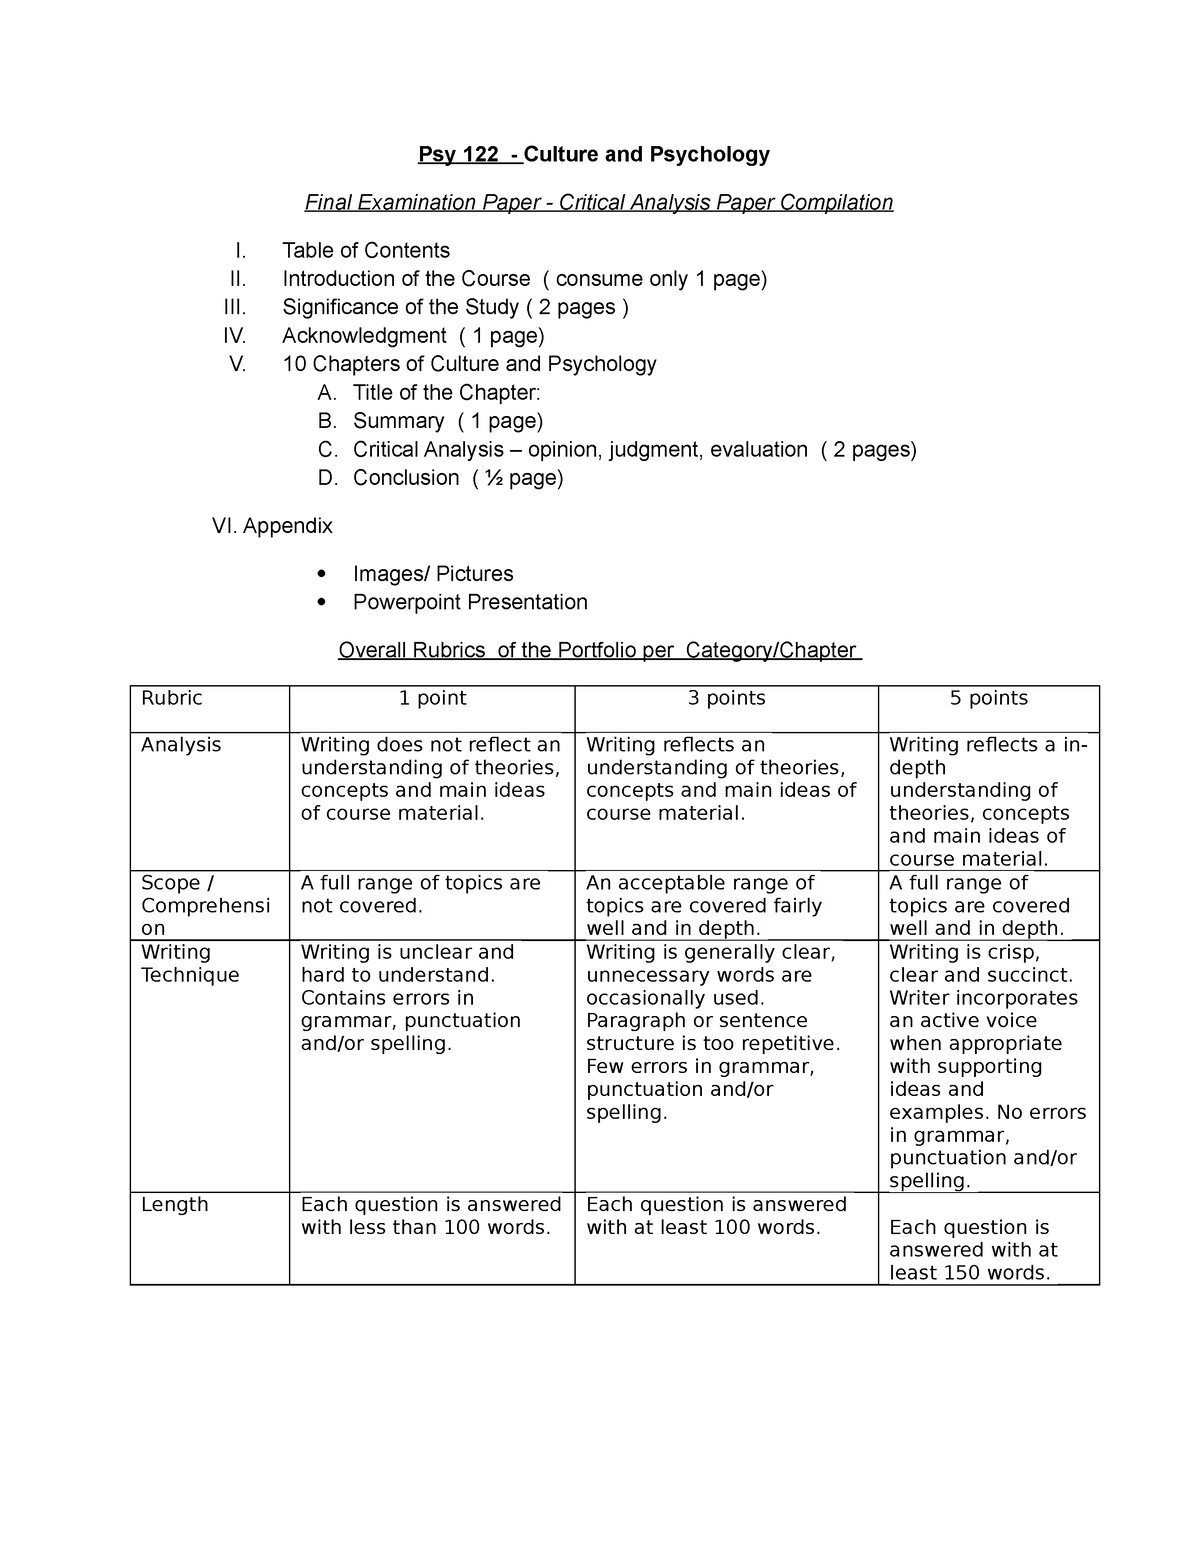 Culture and Psychology Portfolio rubrics - Psy 122 - Culture and ...